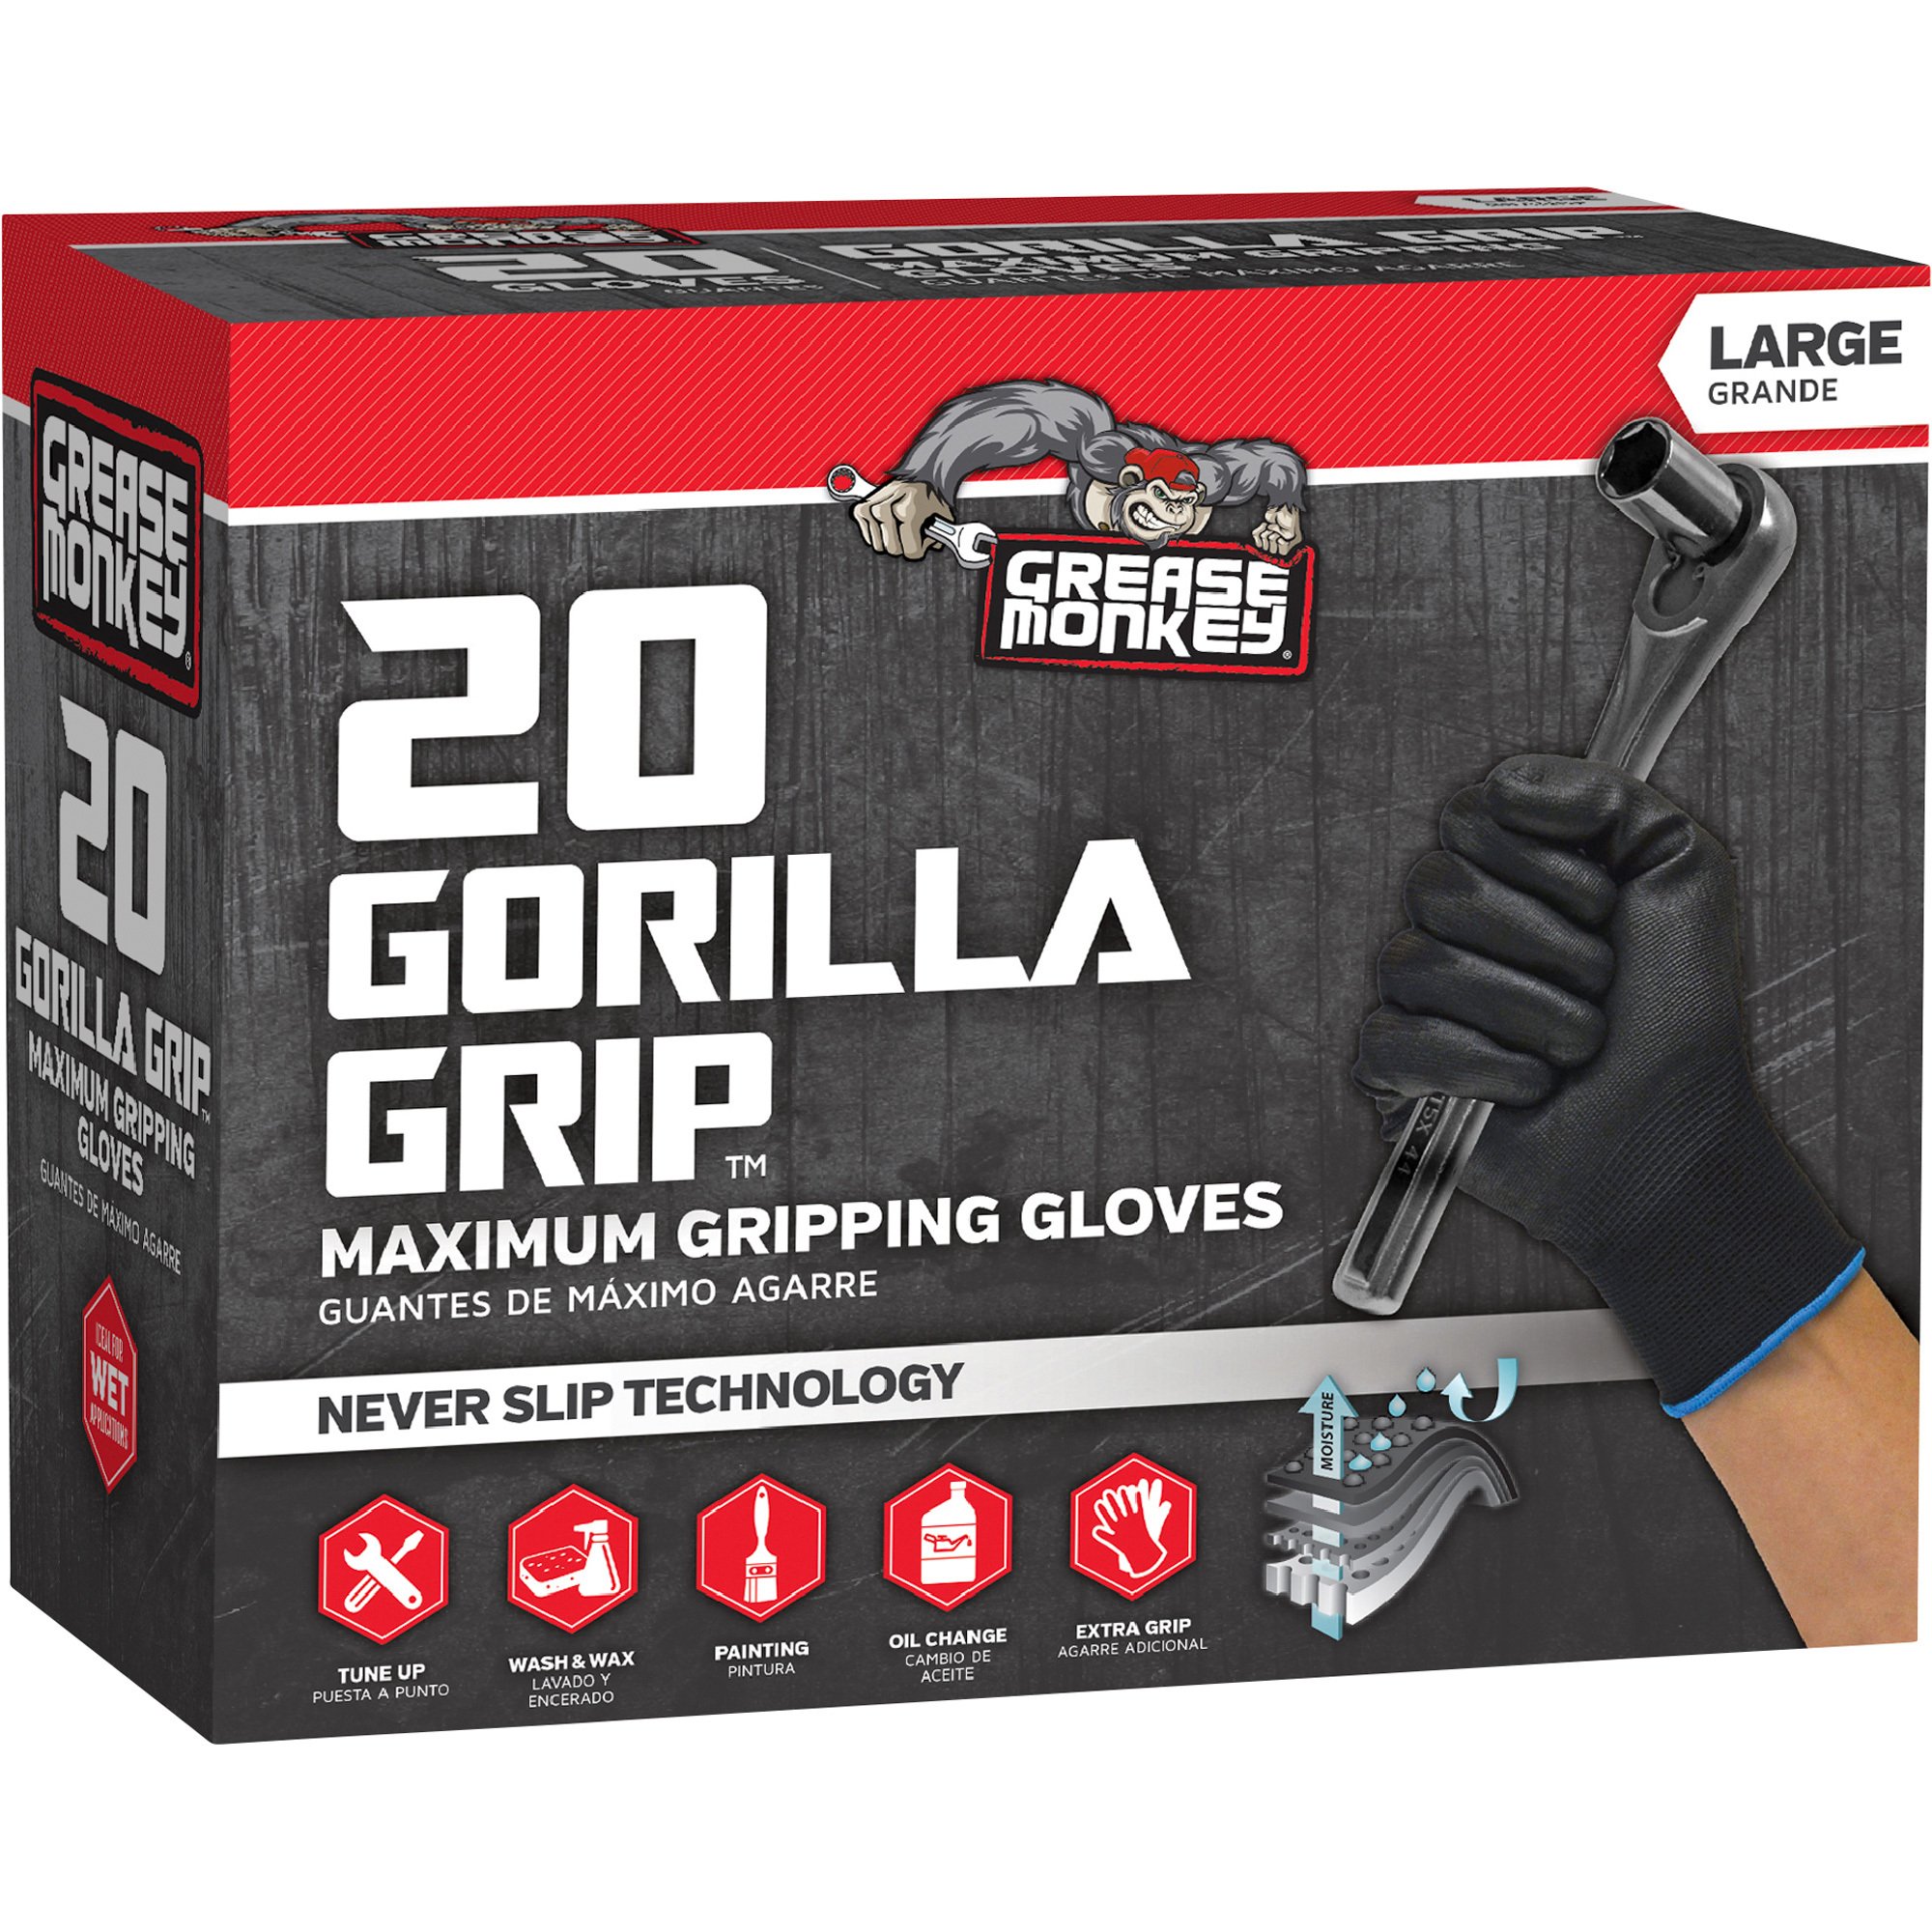 20 Pairs Large Gorilla Grip Gloves Grease Monkey for sale online